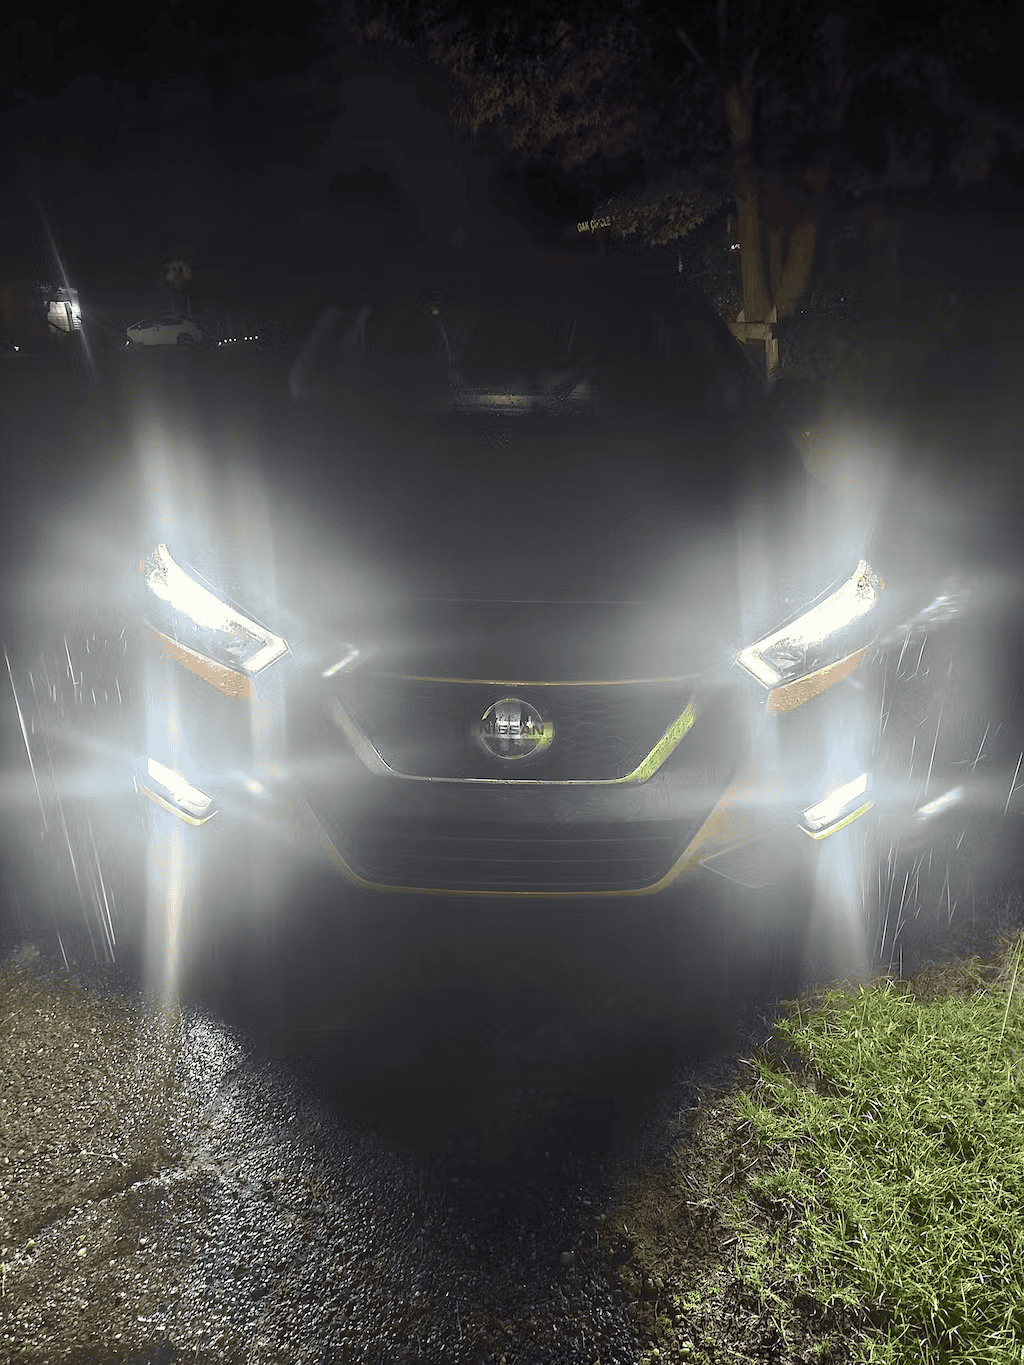 Ford F-150 Lightning The Upgraded LED Solution for Halogen Headlights photo5-lasfit led bulb-LAair H11 customer feedback shot by Justi